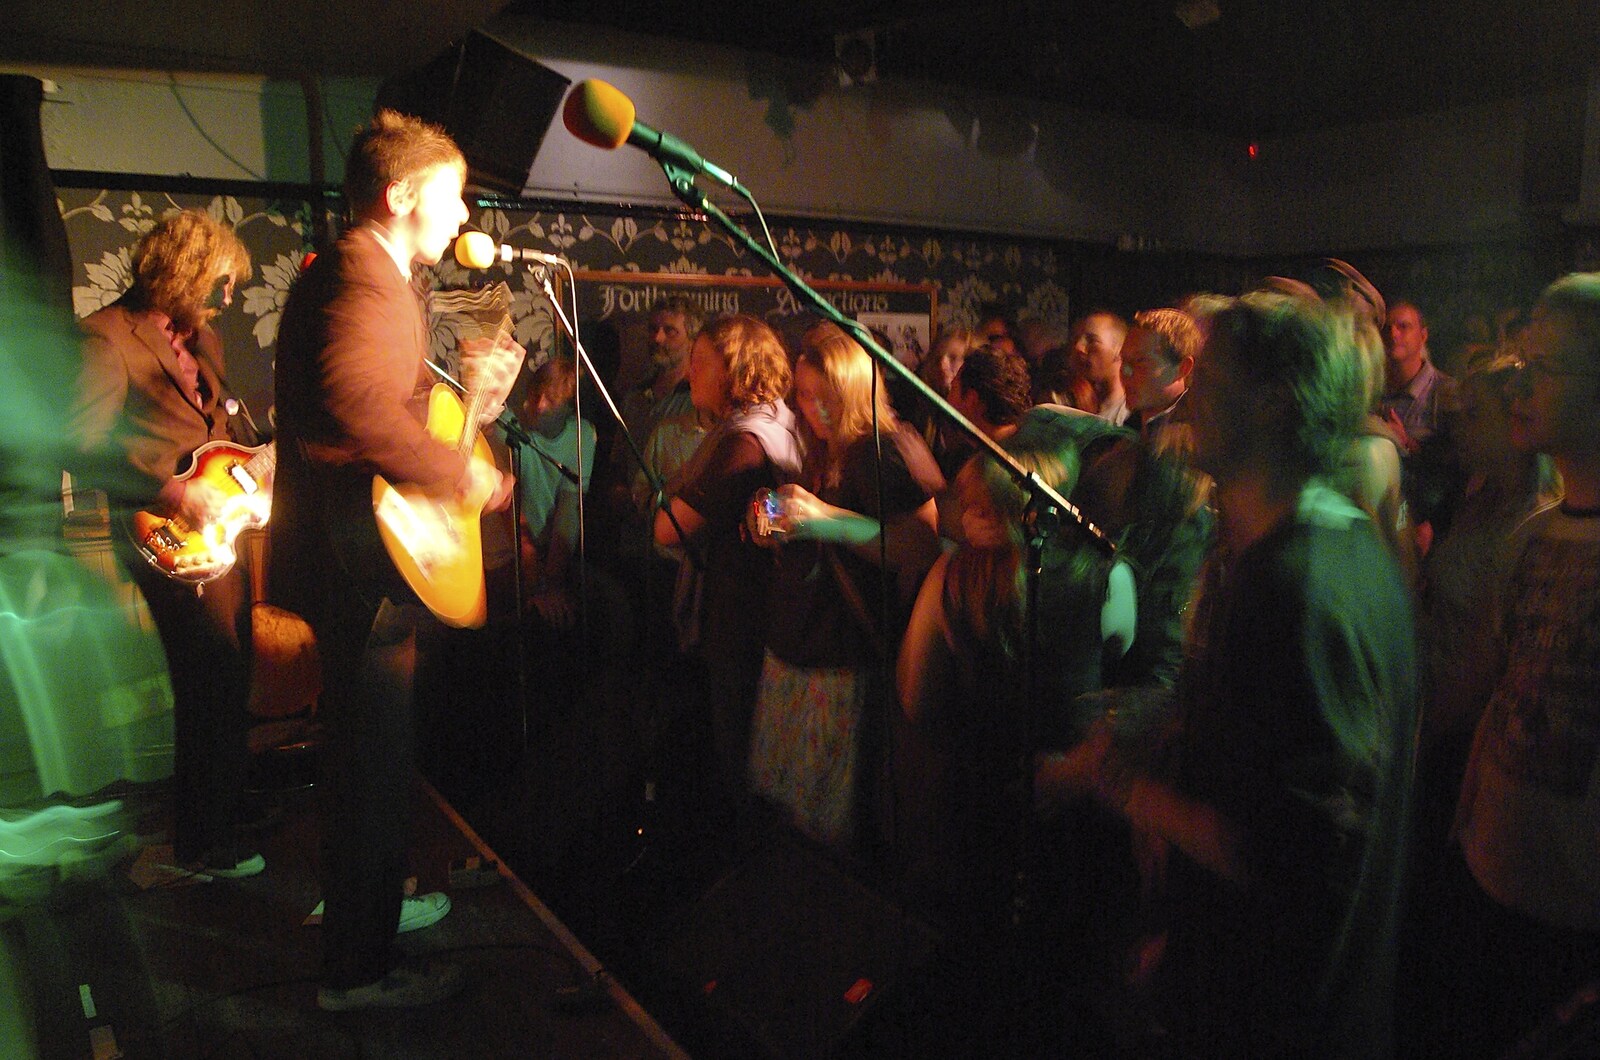 The Shivers Live at the Portland Arms, Cambridge - 26th August 2007: The Portland Arms crowd